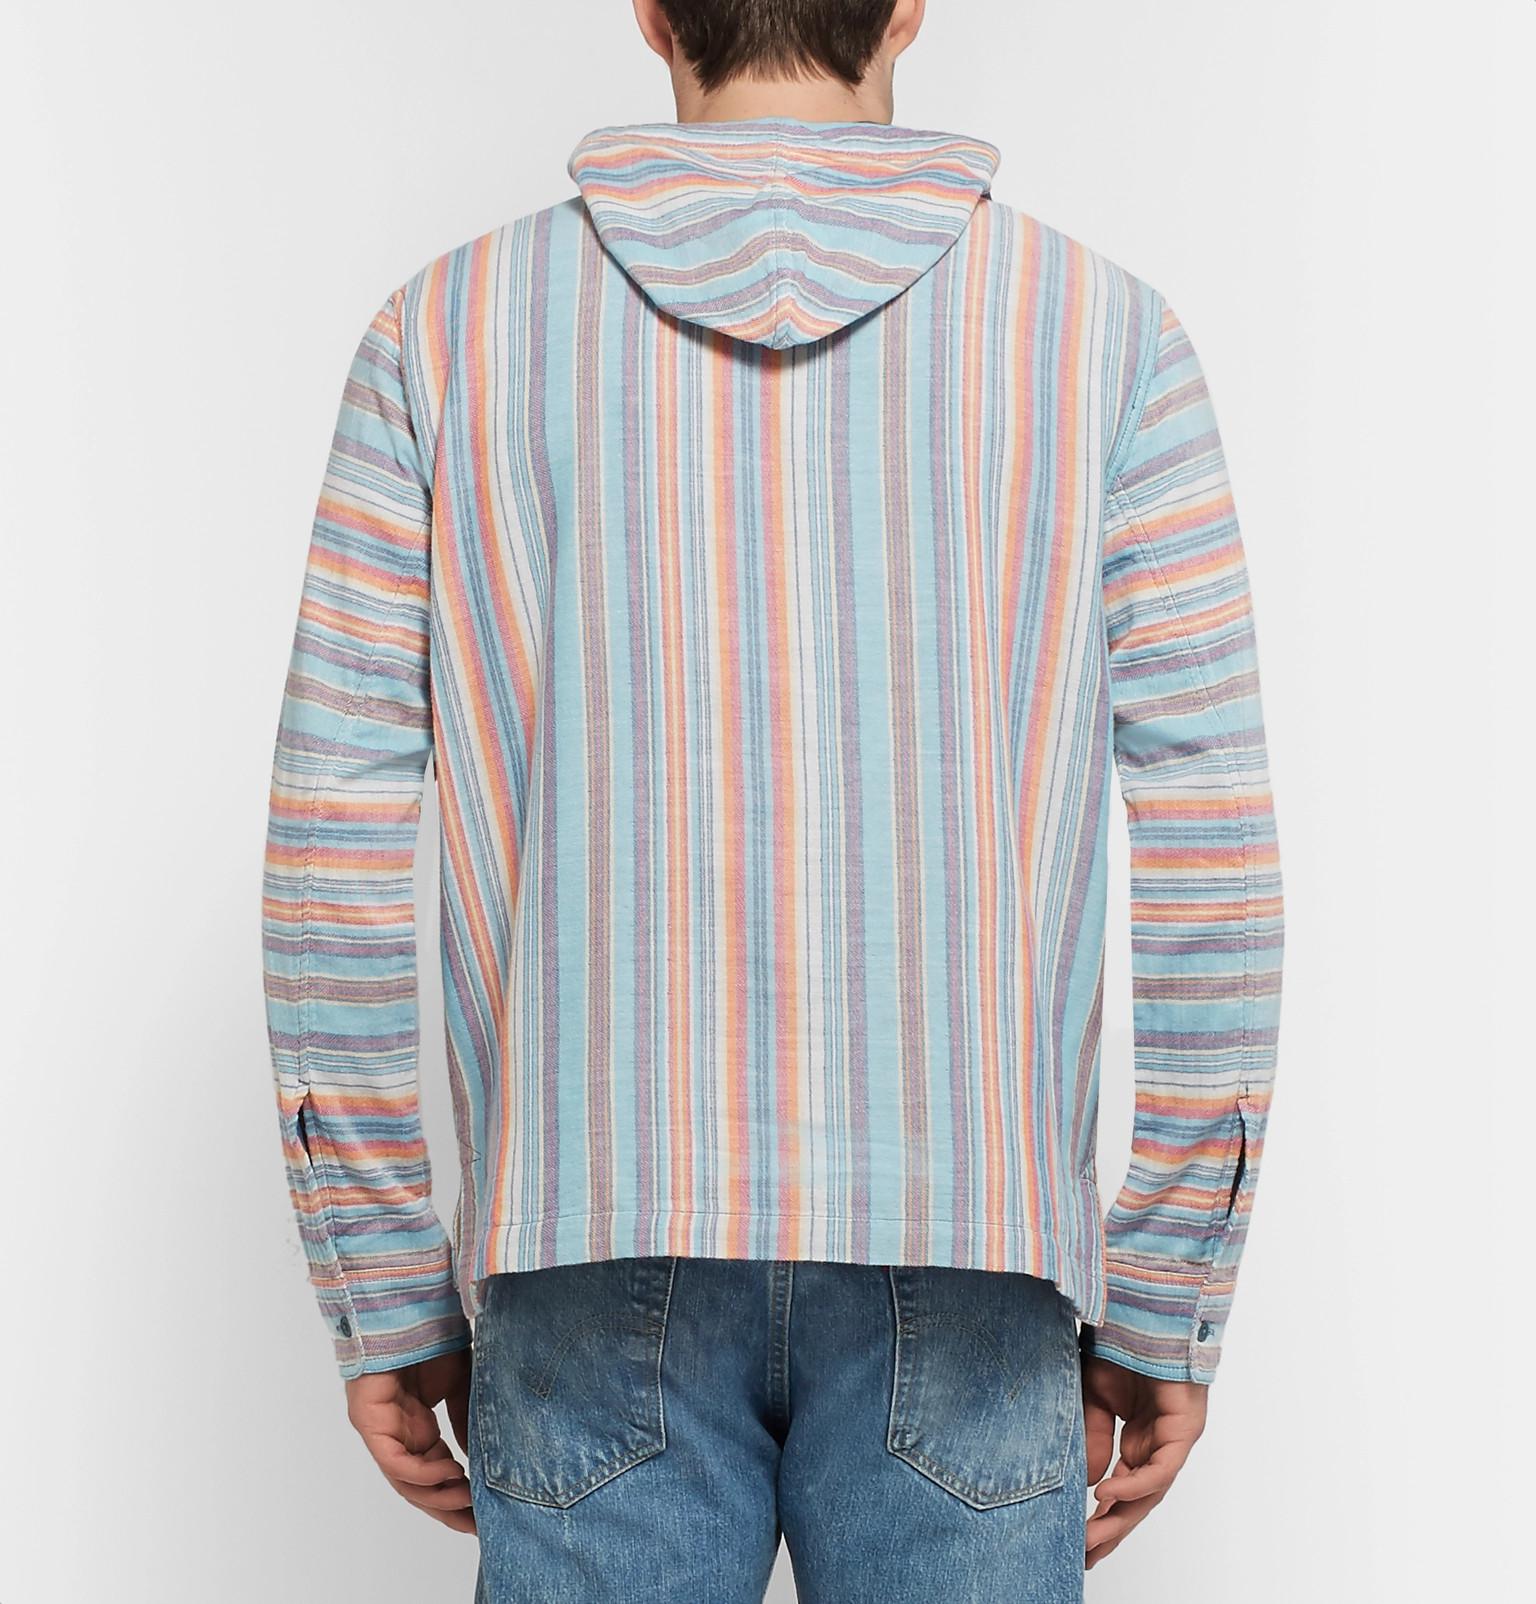 Faherty Brand Baja Striped Cotton Hoodie in Blue for Men - Lyst